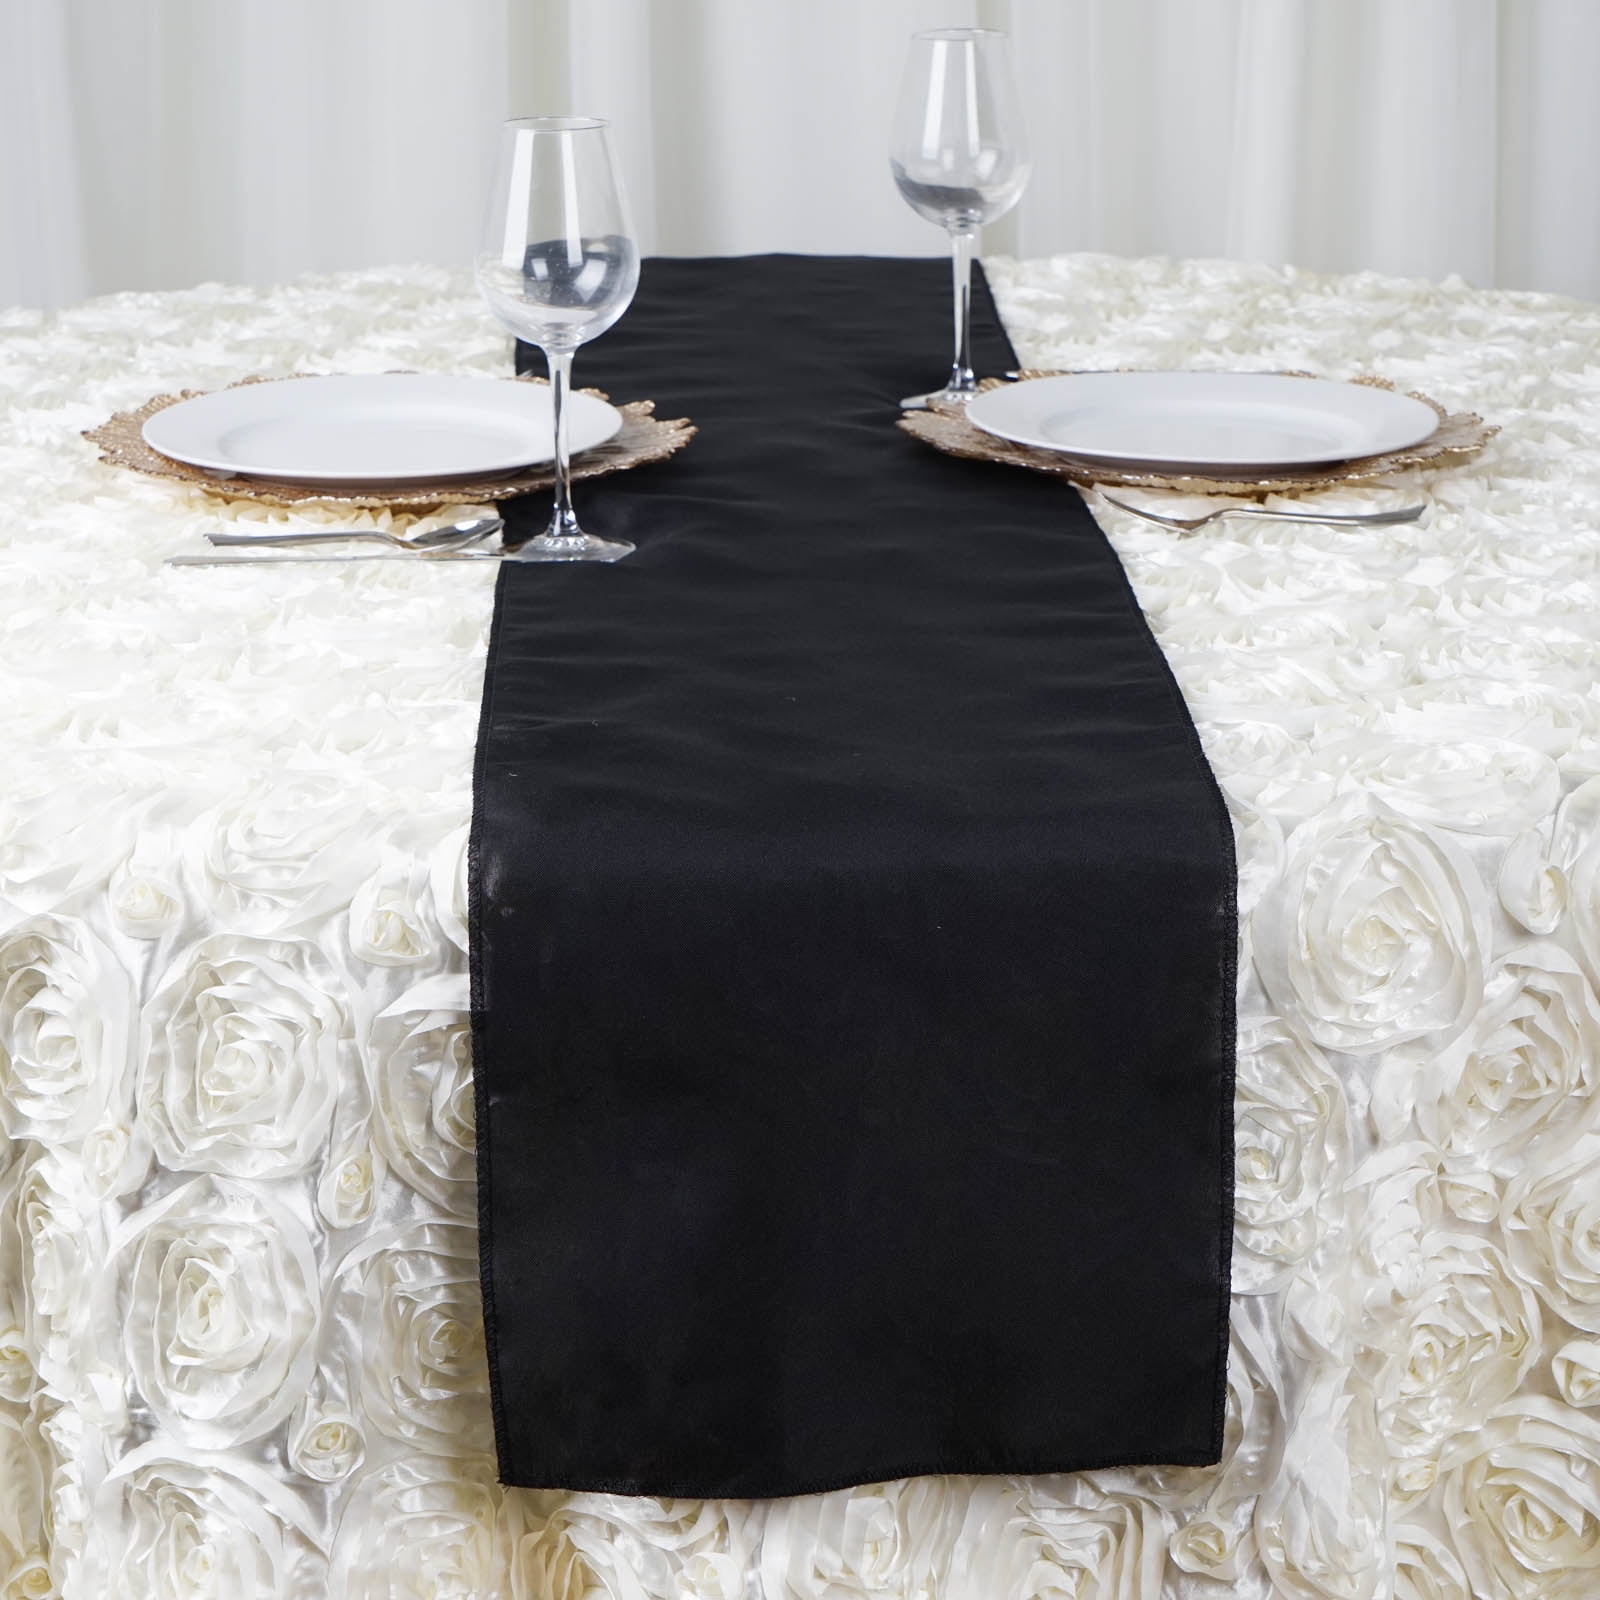 5PCS Polyester Runner 12x108" Table Top Wedding Catering Party Decorations 